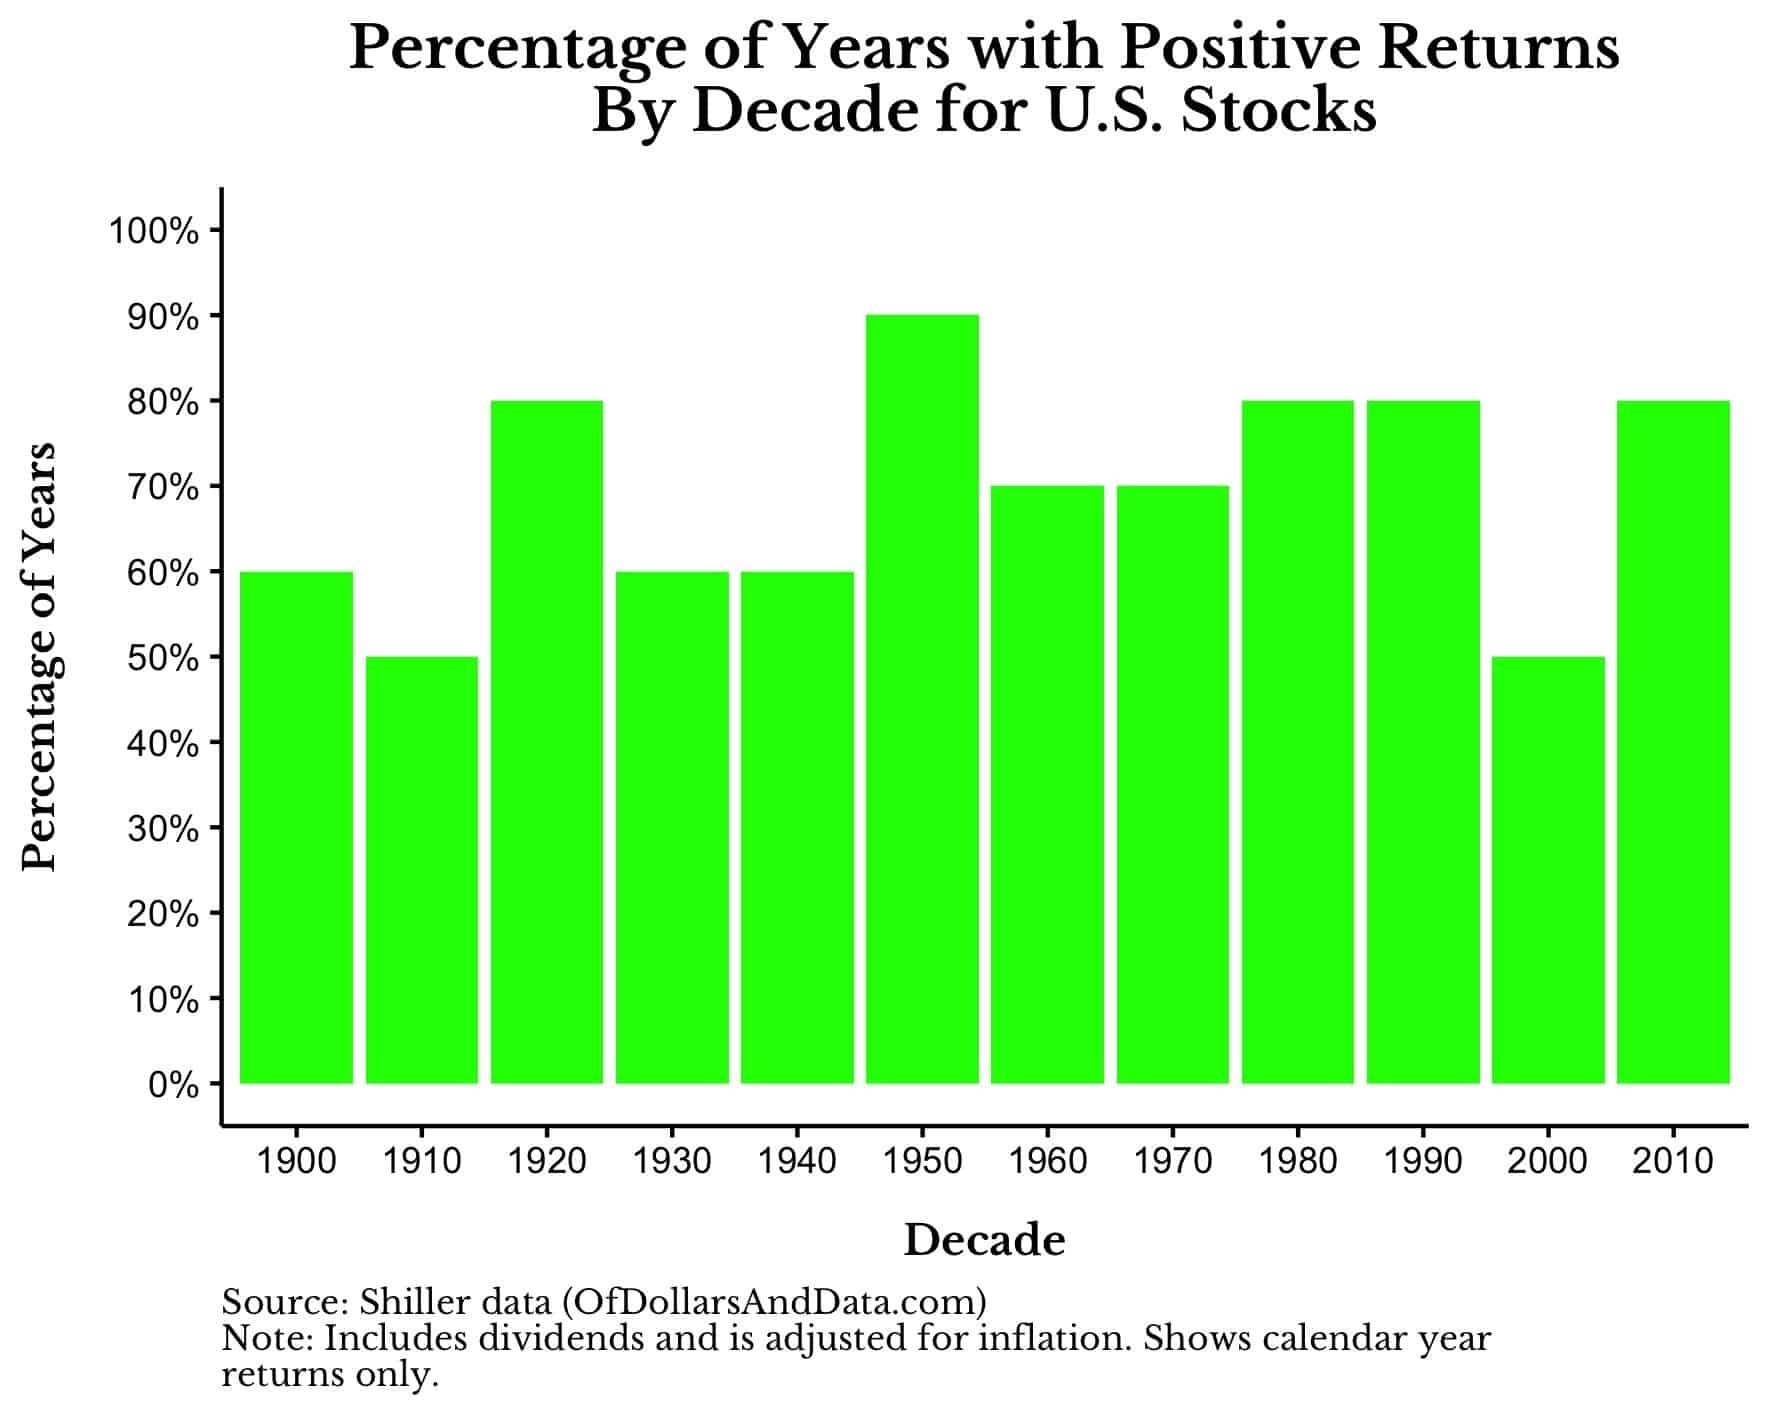 chart shows that the average is around 70% of the time, meaning that seven out of every 10 years ends positive